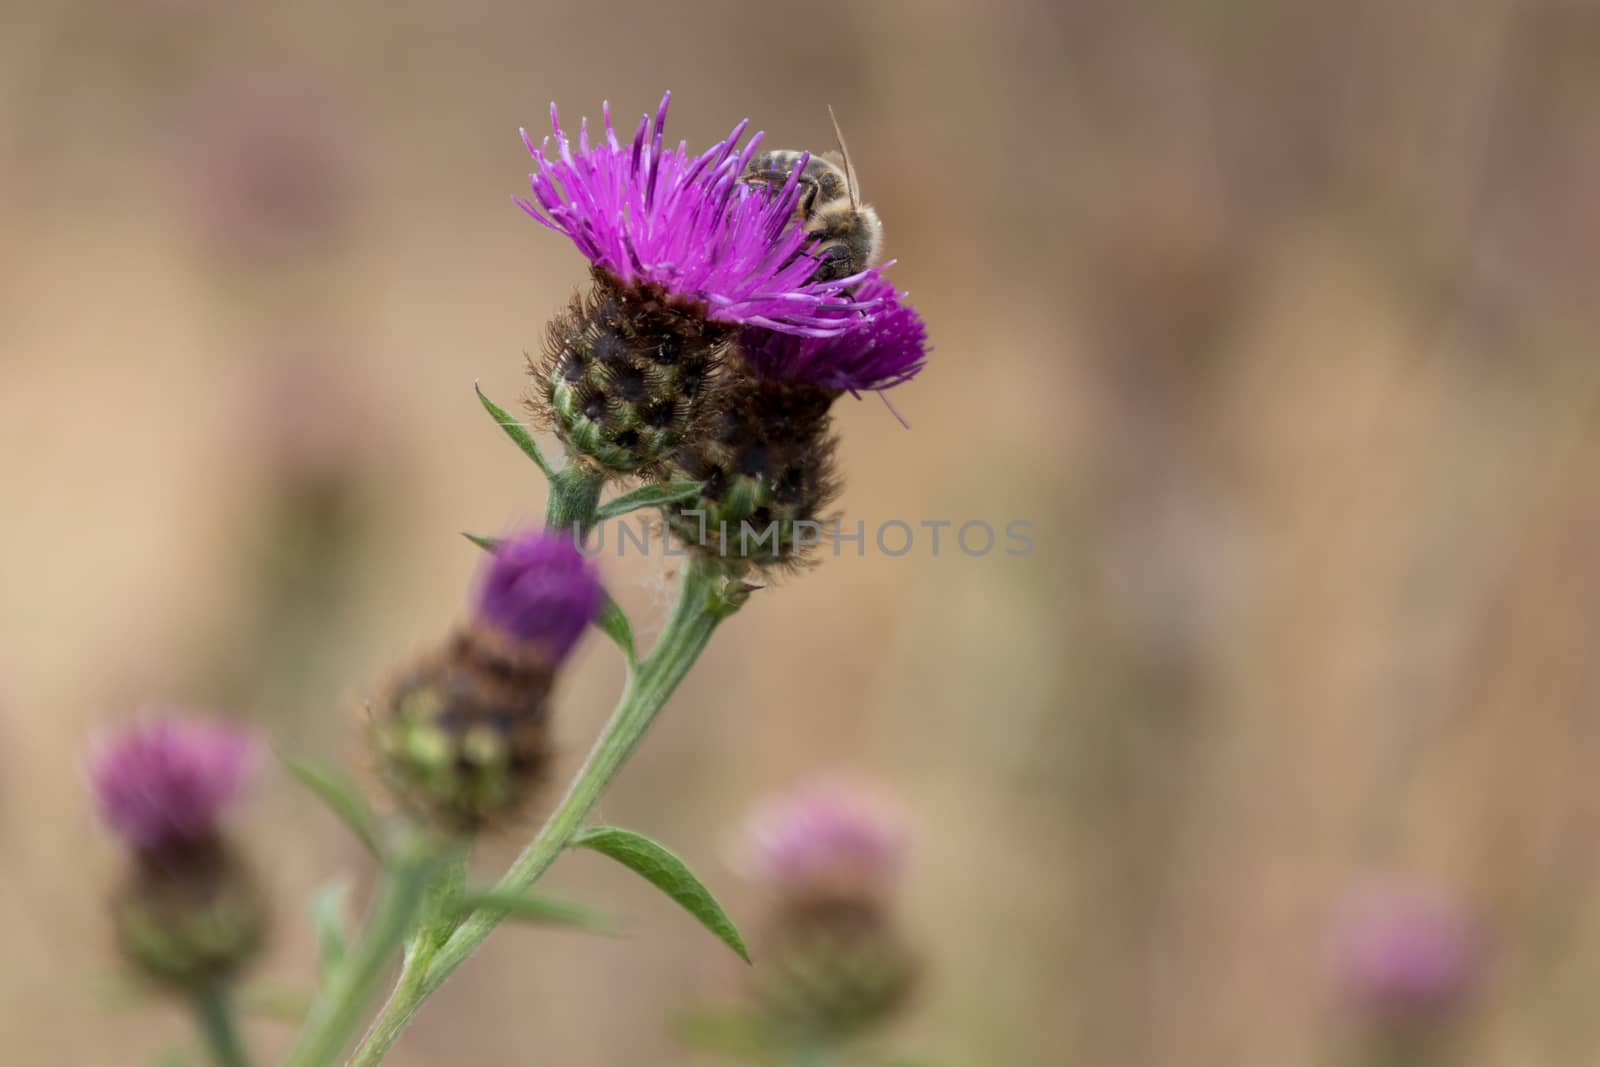 Western Honey Bee (Apis mellifera) gathering pollen from a Thistle